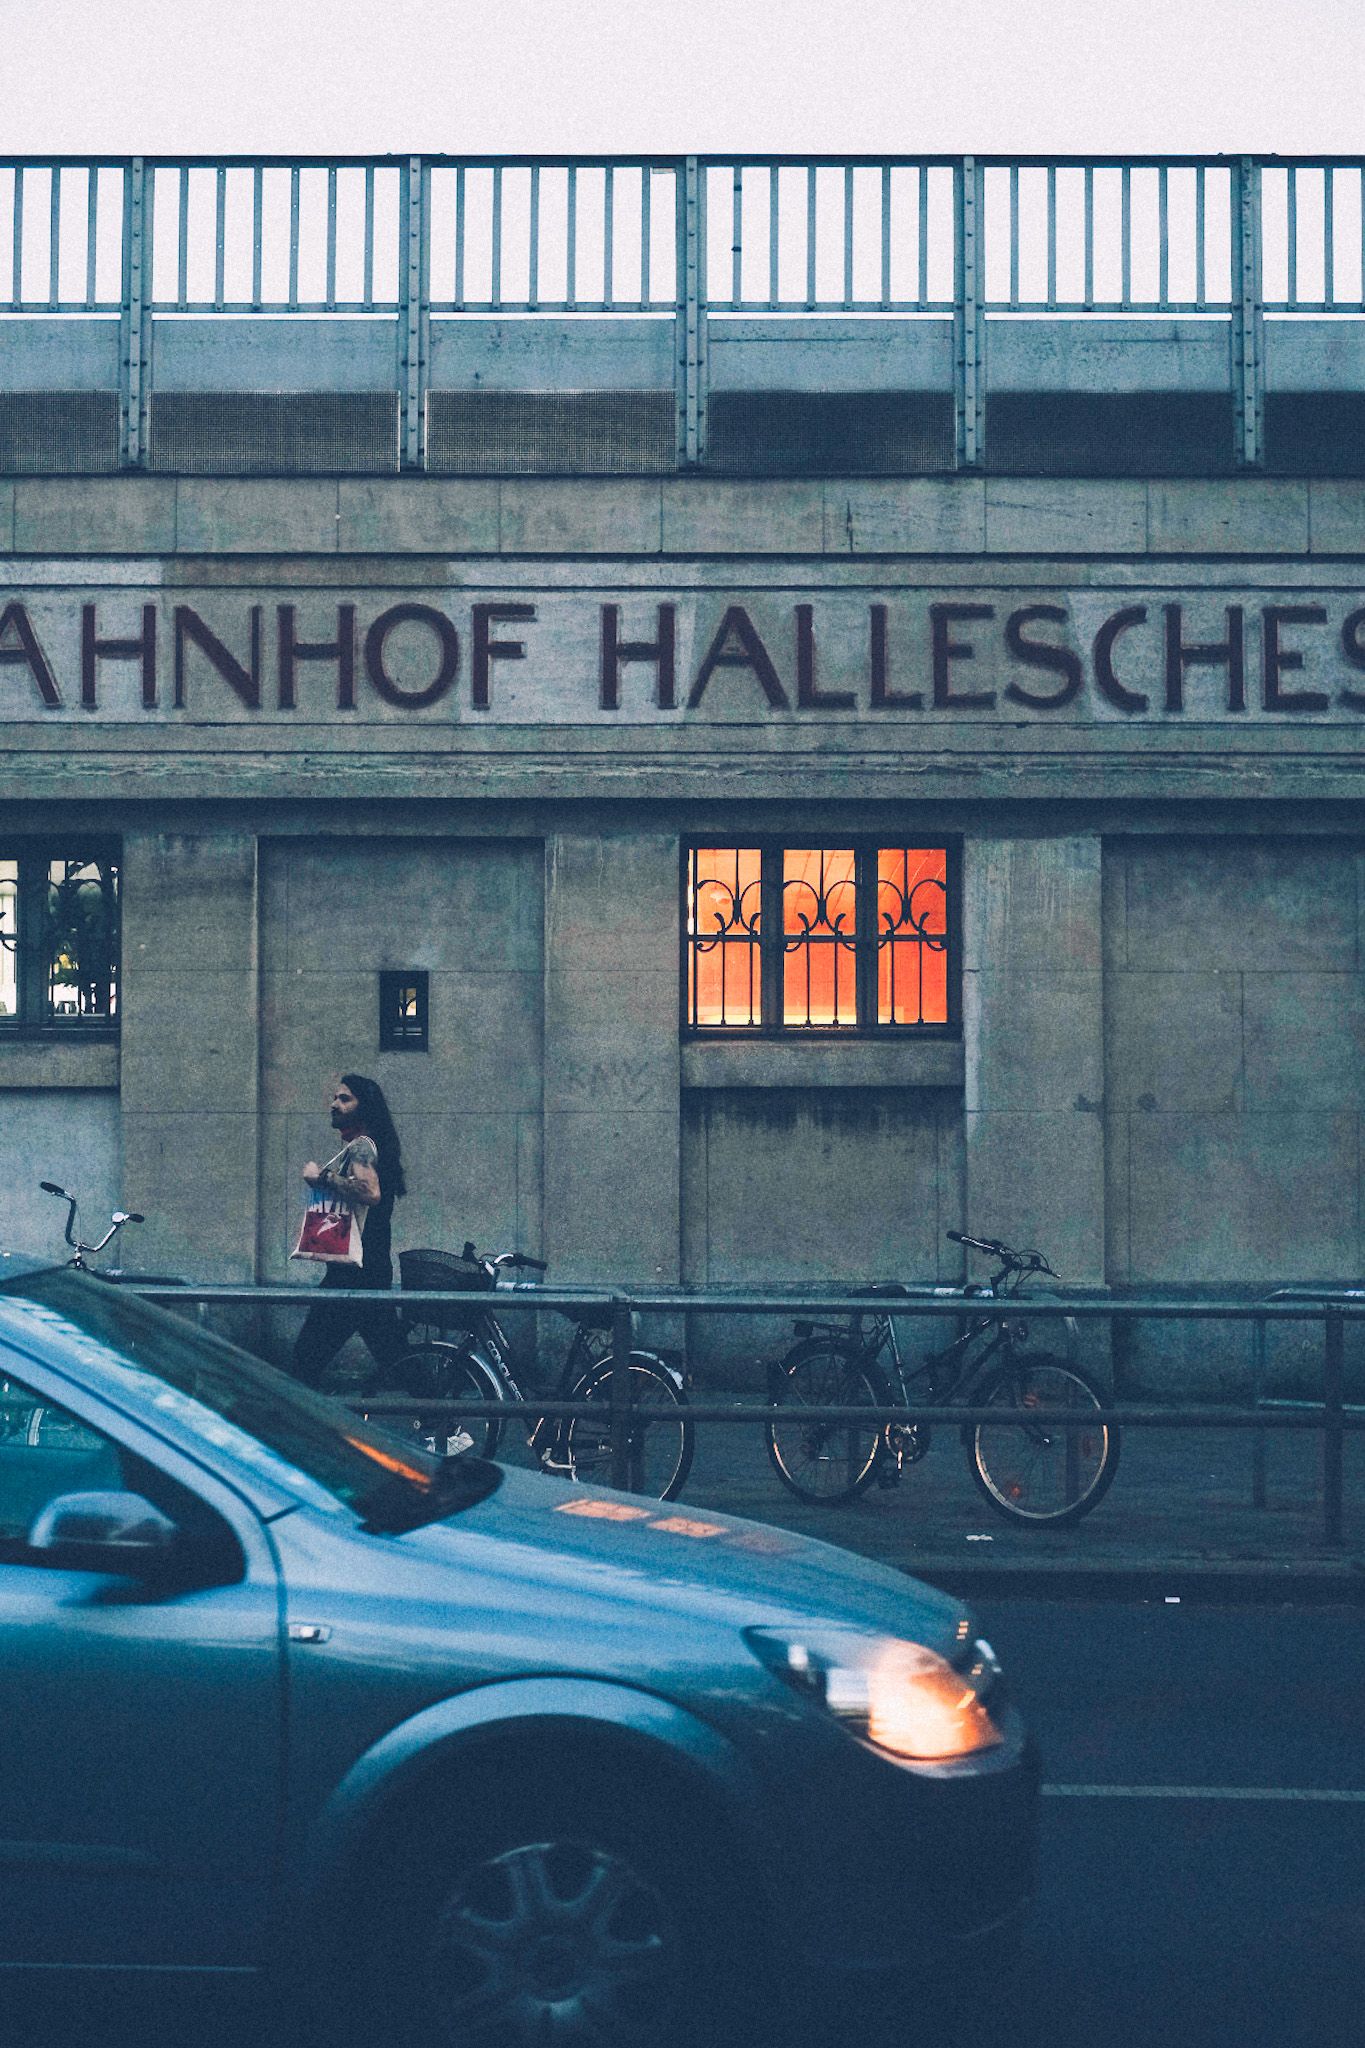 In the light evening, a woman passes by a building with the words “Bahnhof Hallesches” on it, slightly cropped. A square window in the middle of the picture emanates orange light through decorative iron bars.